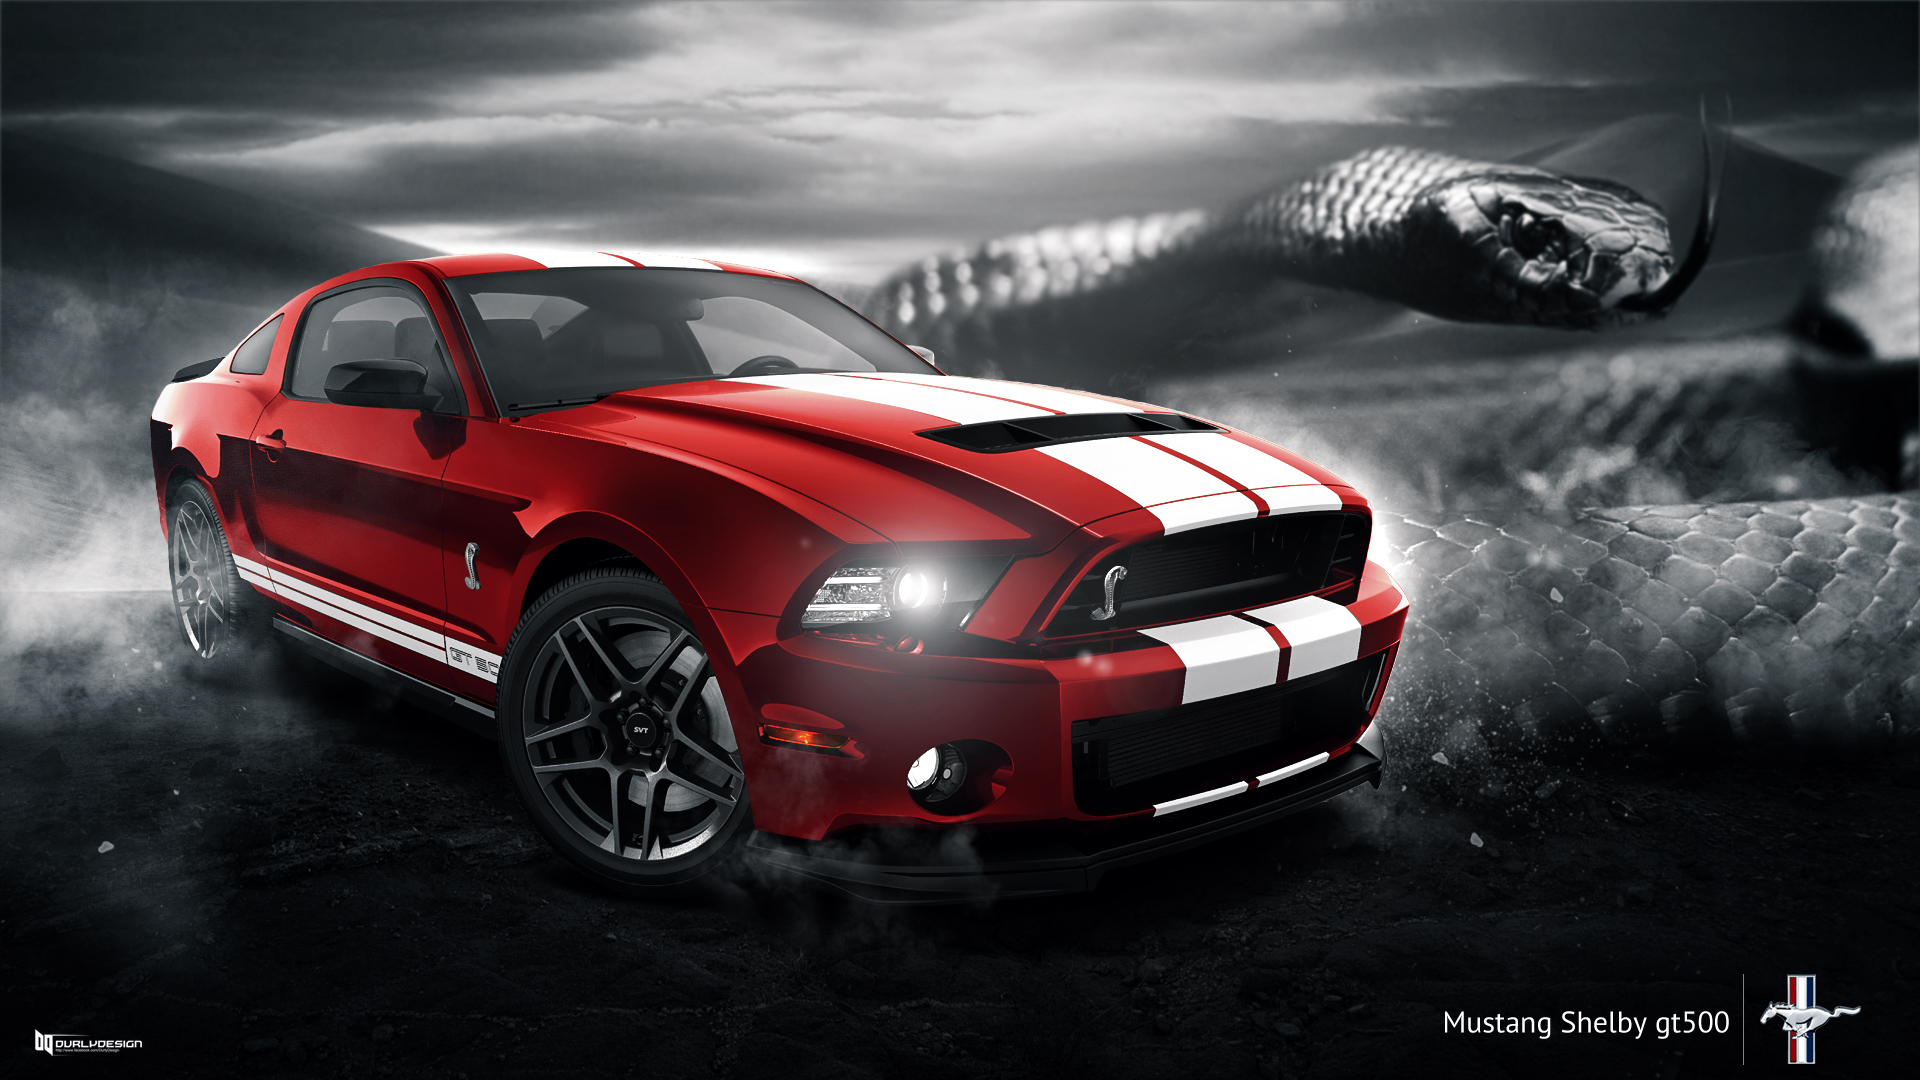 Ford Mustang Shelby Gt500 Wallpaper By Durly0505 On